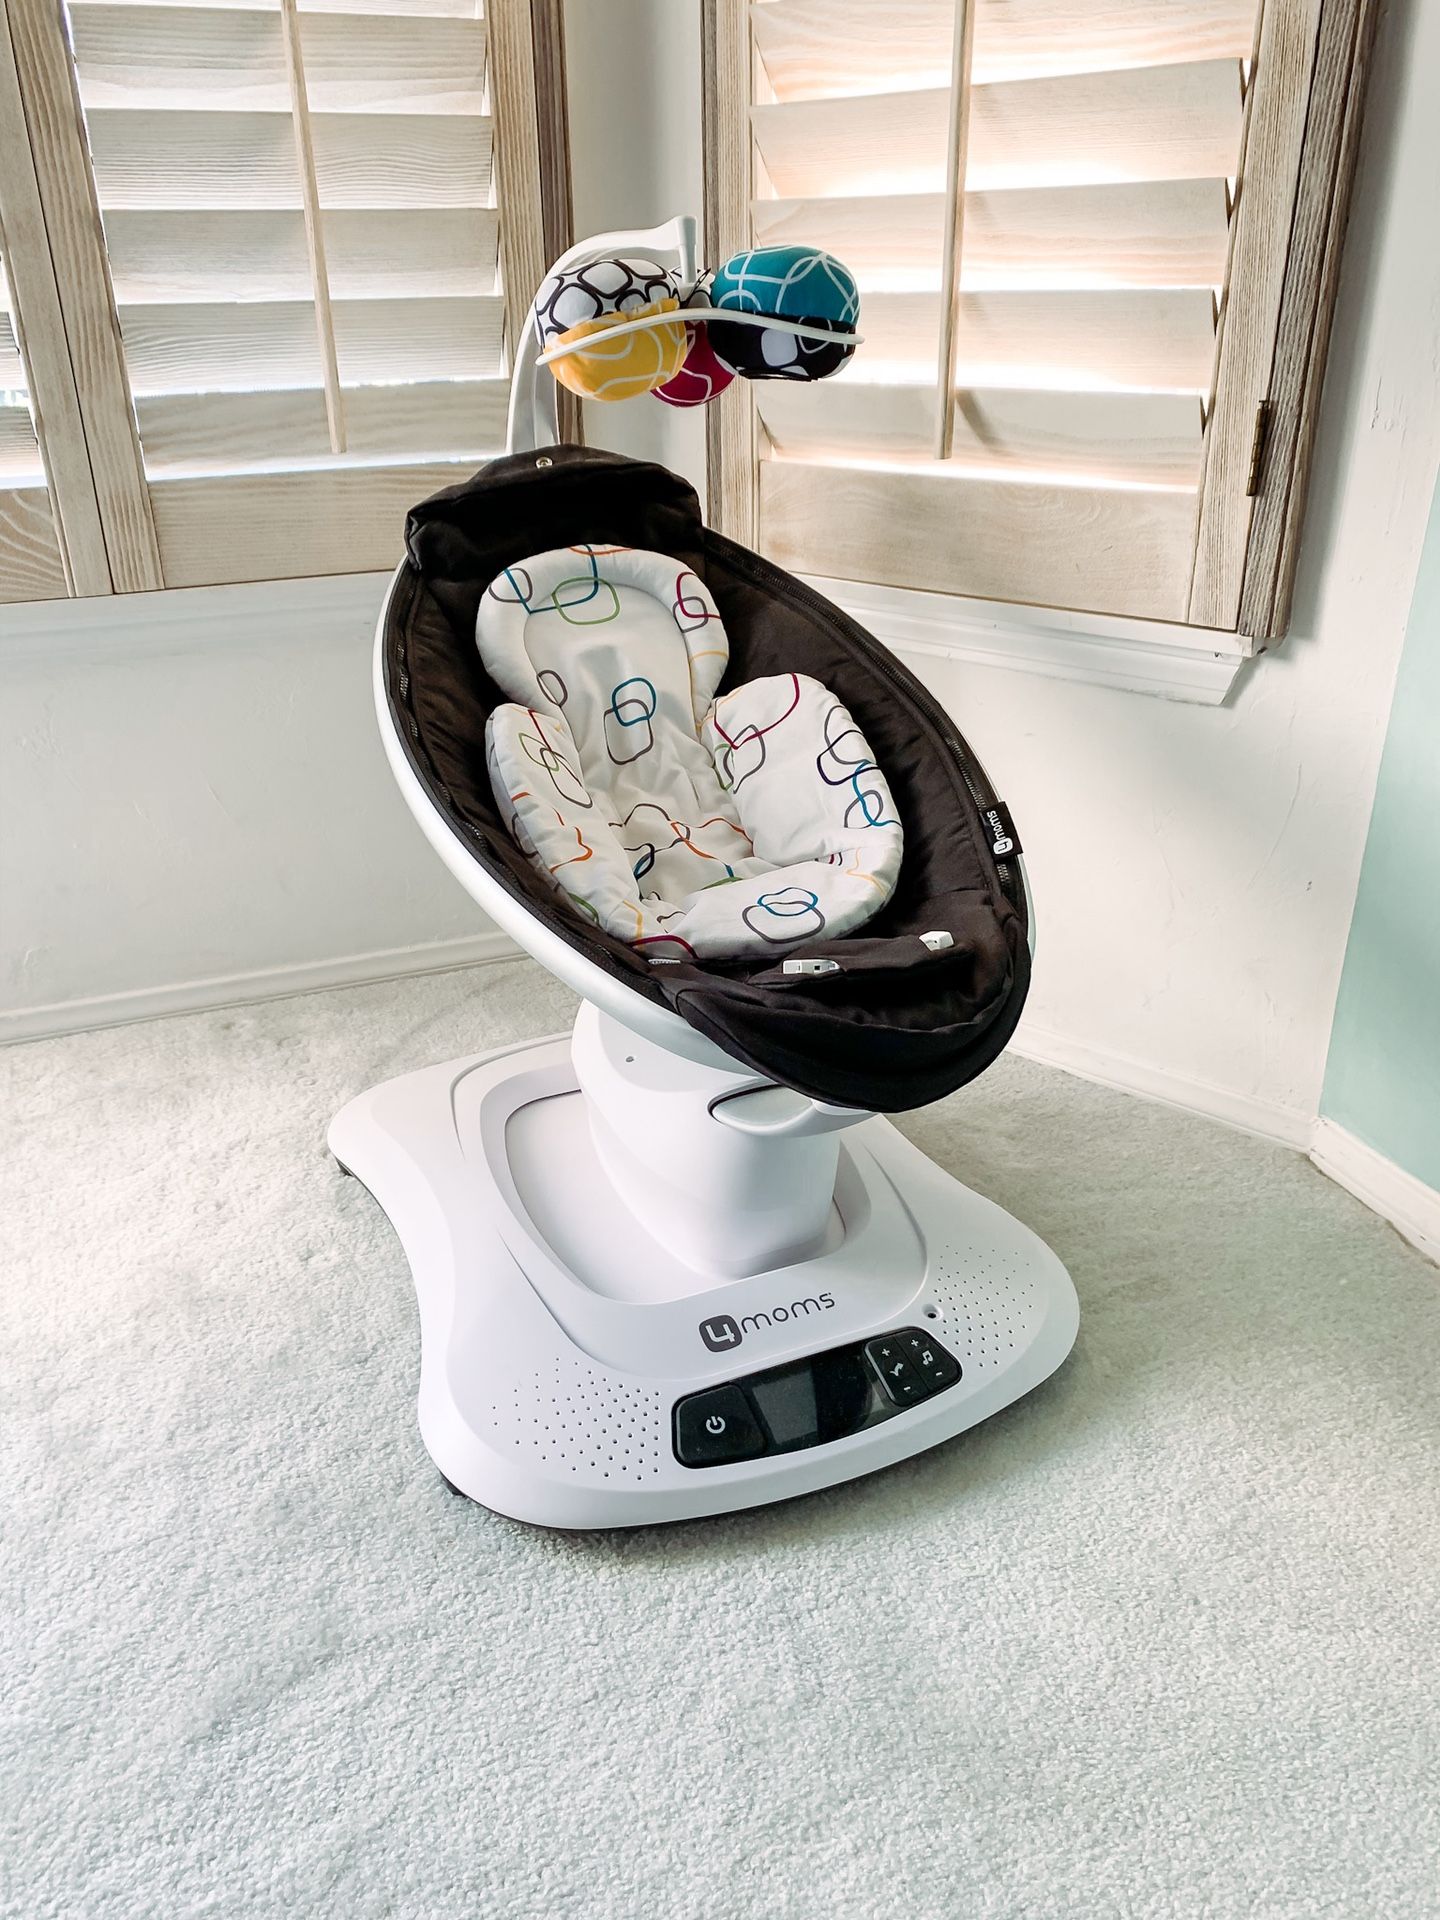 4moms mamaRoo 4 Baby Swing, high-tech Baby Rocker, Bluetooth Enabled without infant insert